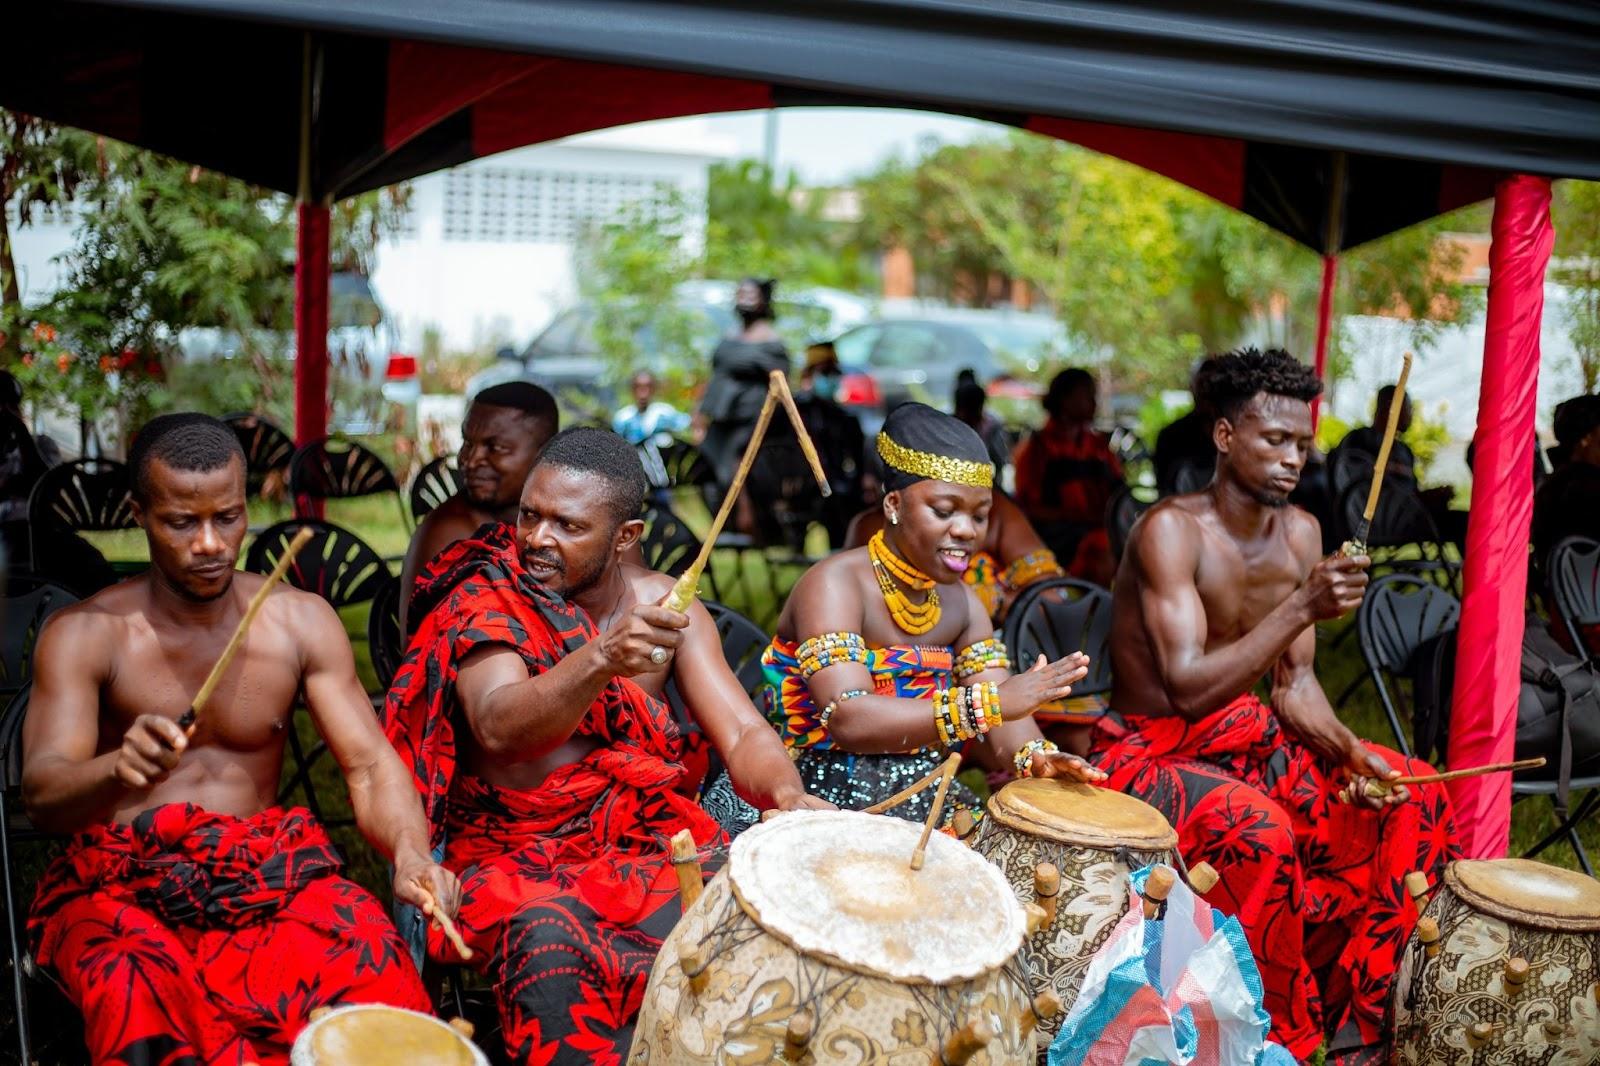 Traditional Ghanaian musicians dressed in red, playing the drums